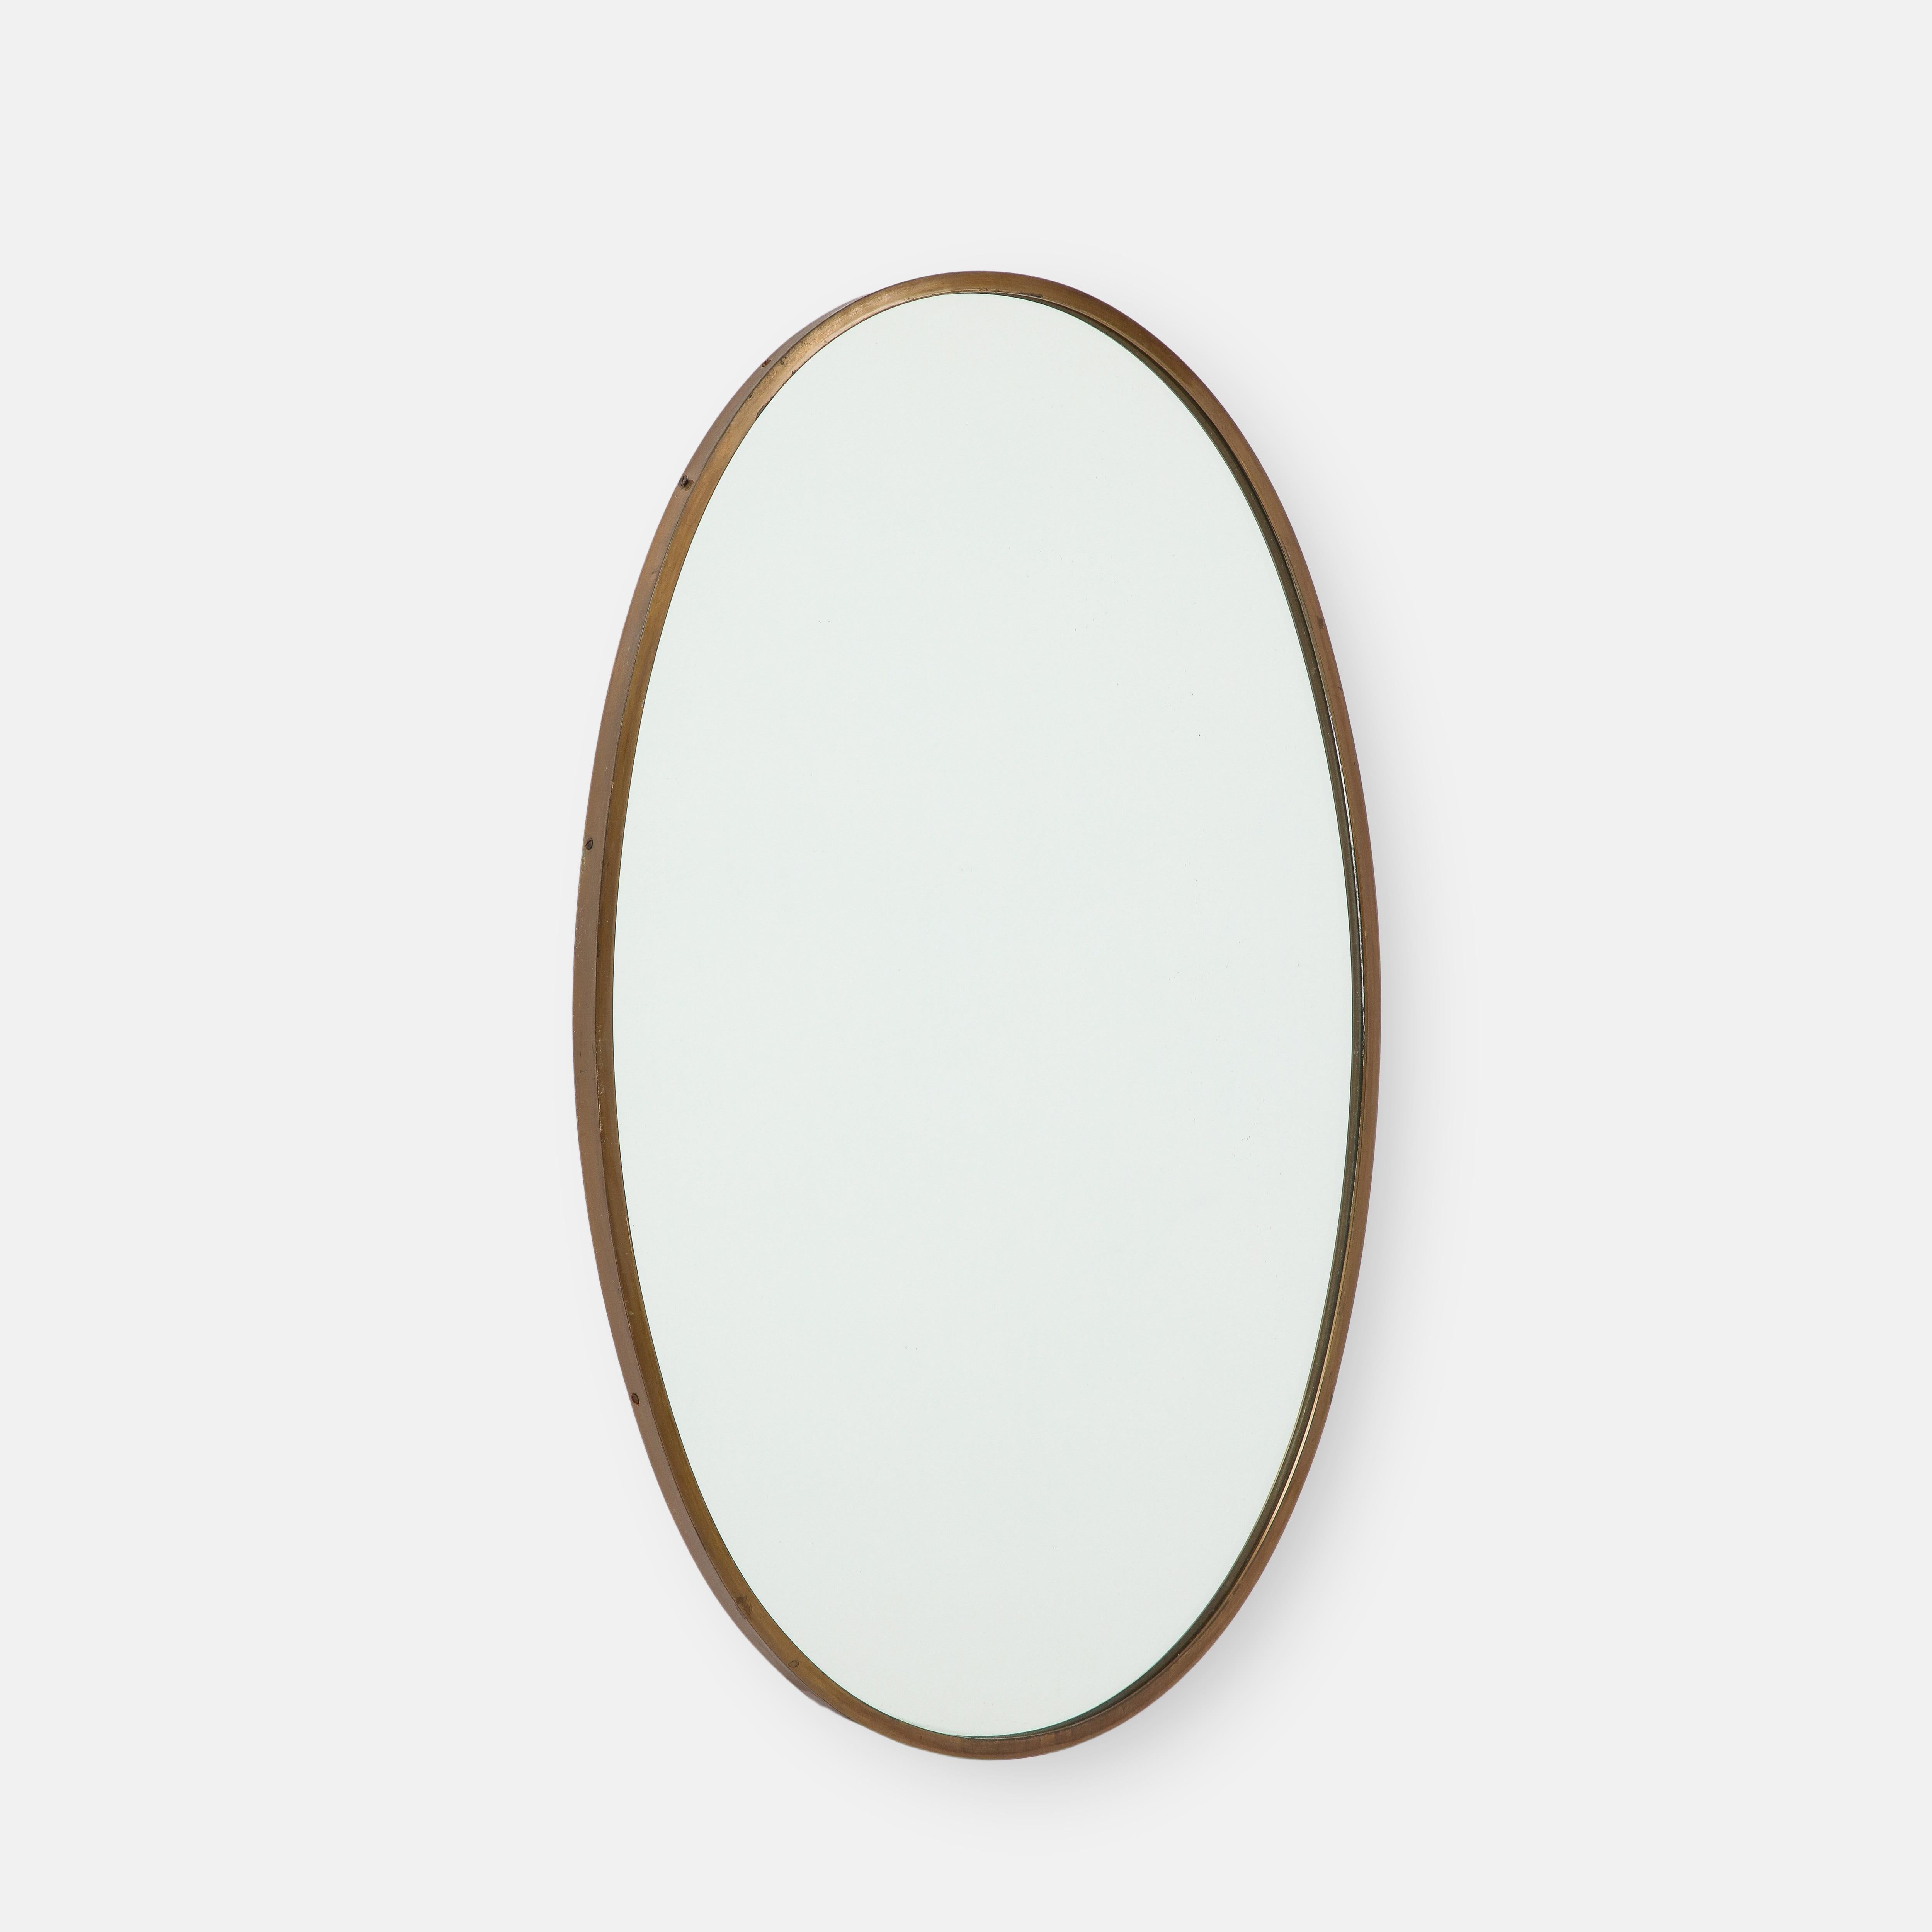 1950s Elegant Italian oval brass wall mirror with a rich patina on the brass frame, original mirrored glass.  Finely constructed with wood backing.